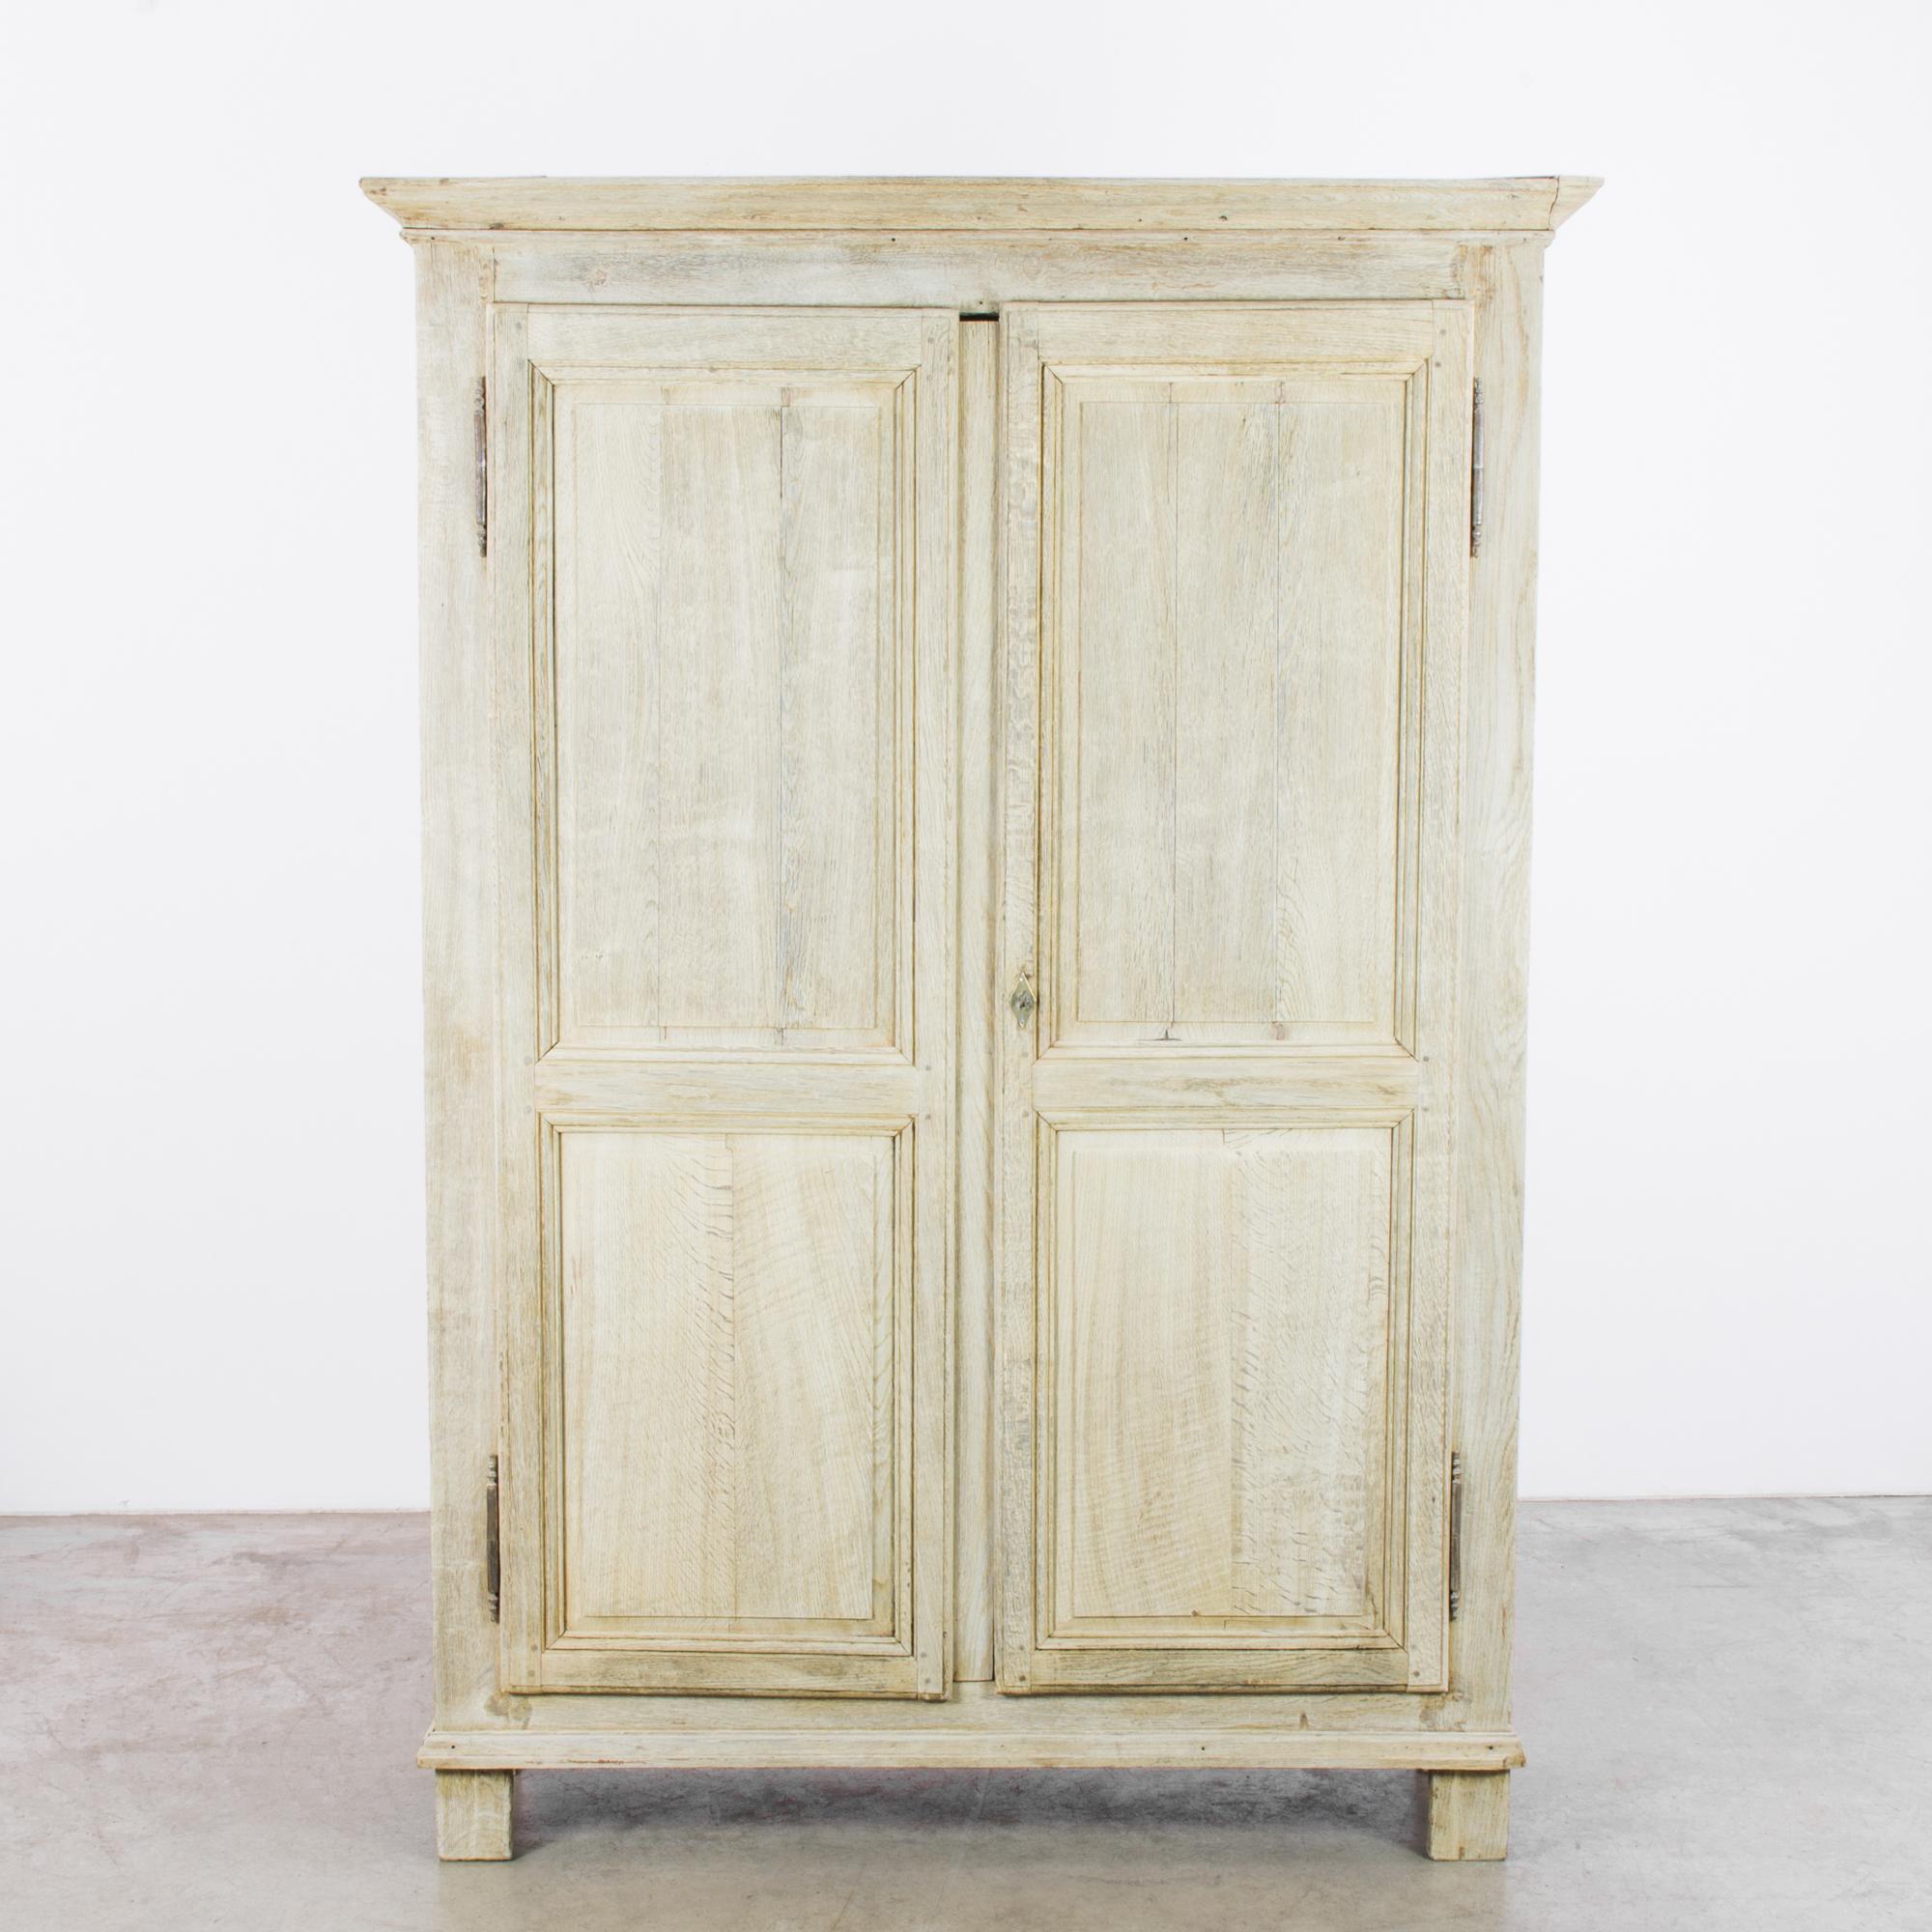 An oak armoire from 1860s, France. The oak has been restored to a bright, luminous finish, lending a lightness and agility to the broad silhouette. Paneled doors open onto the sable-colored wood of the interior, gently iridescent. Three shelves